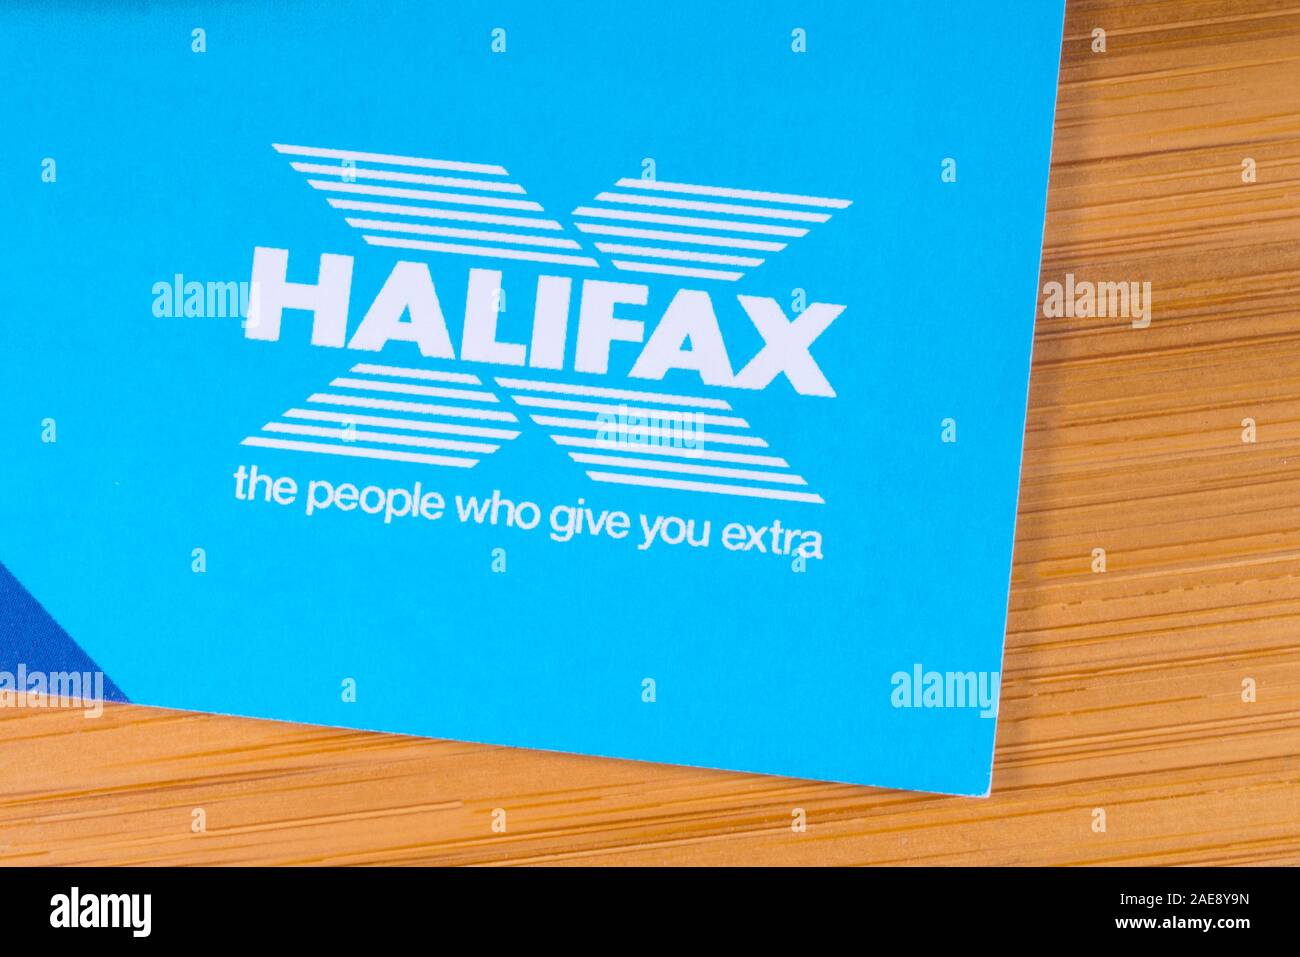 London, UK - December 3rd 2019: Close-up of the Halifax bank logo, pictured on an information booklet. Stock Photo